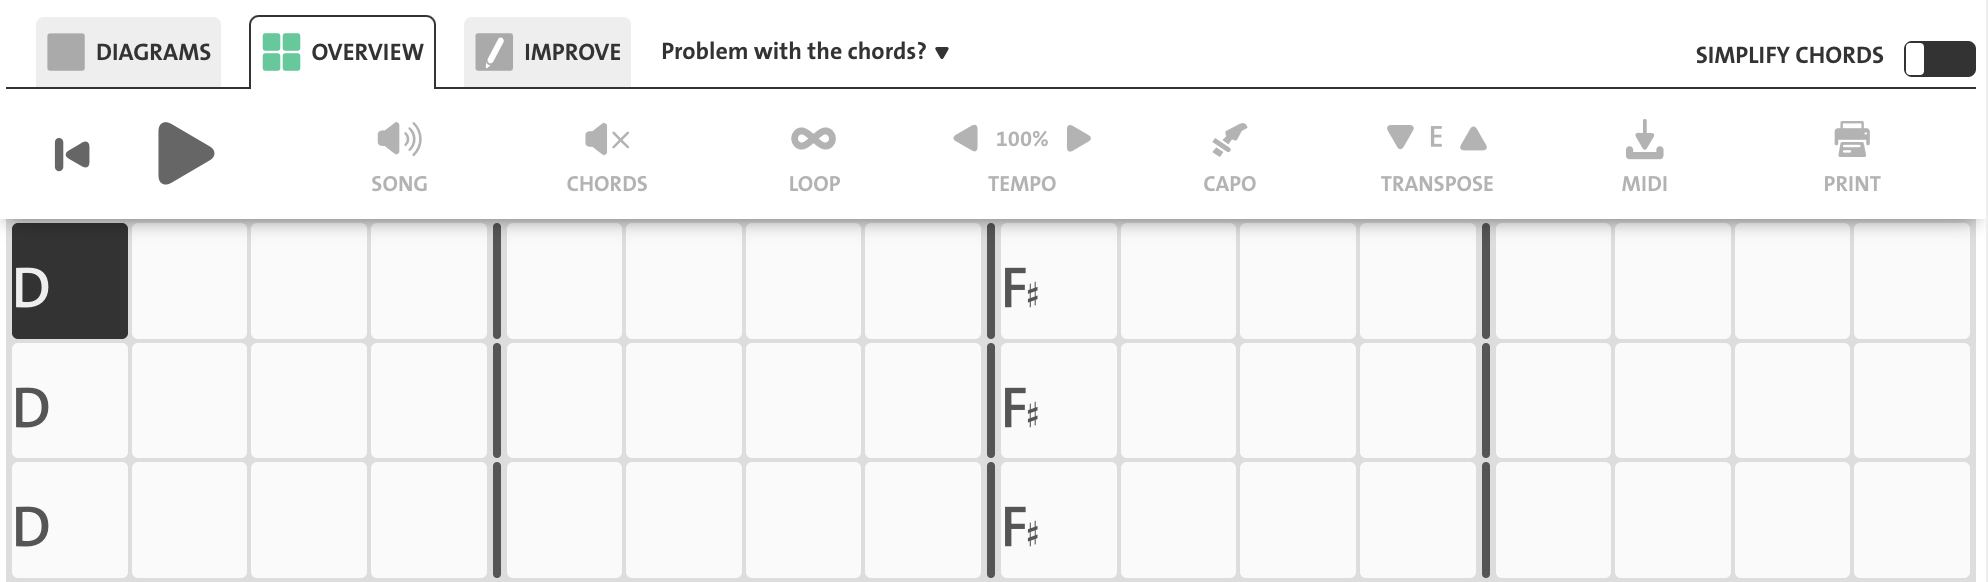 Chords_Overview.png